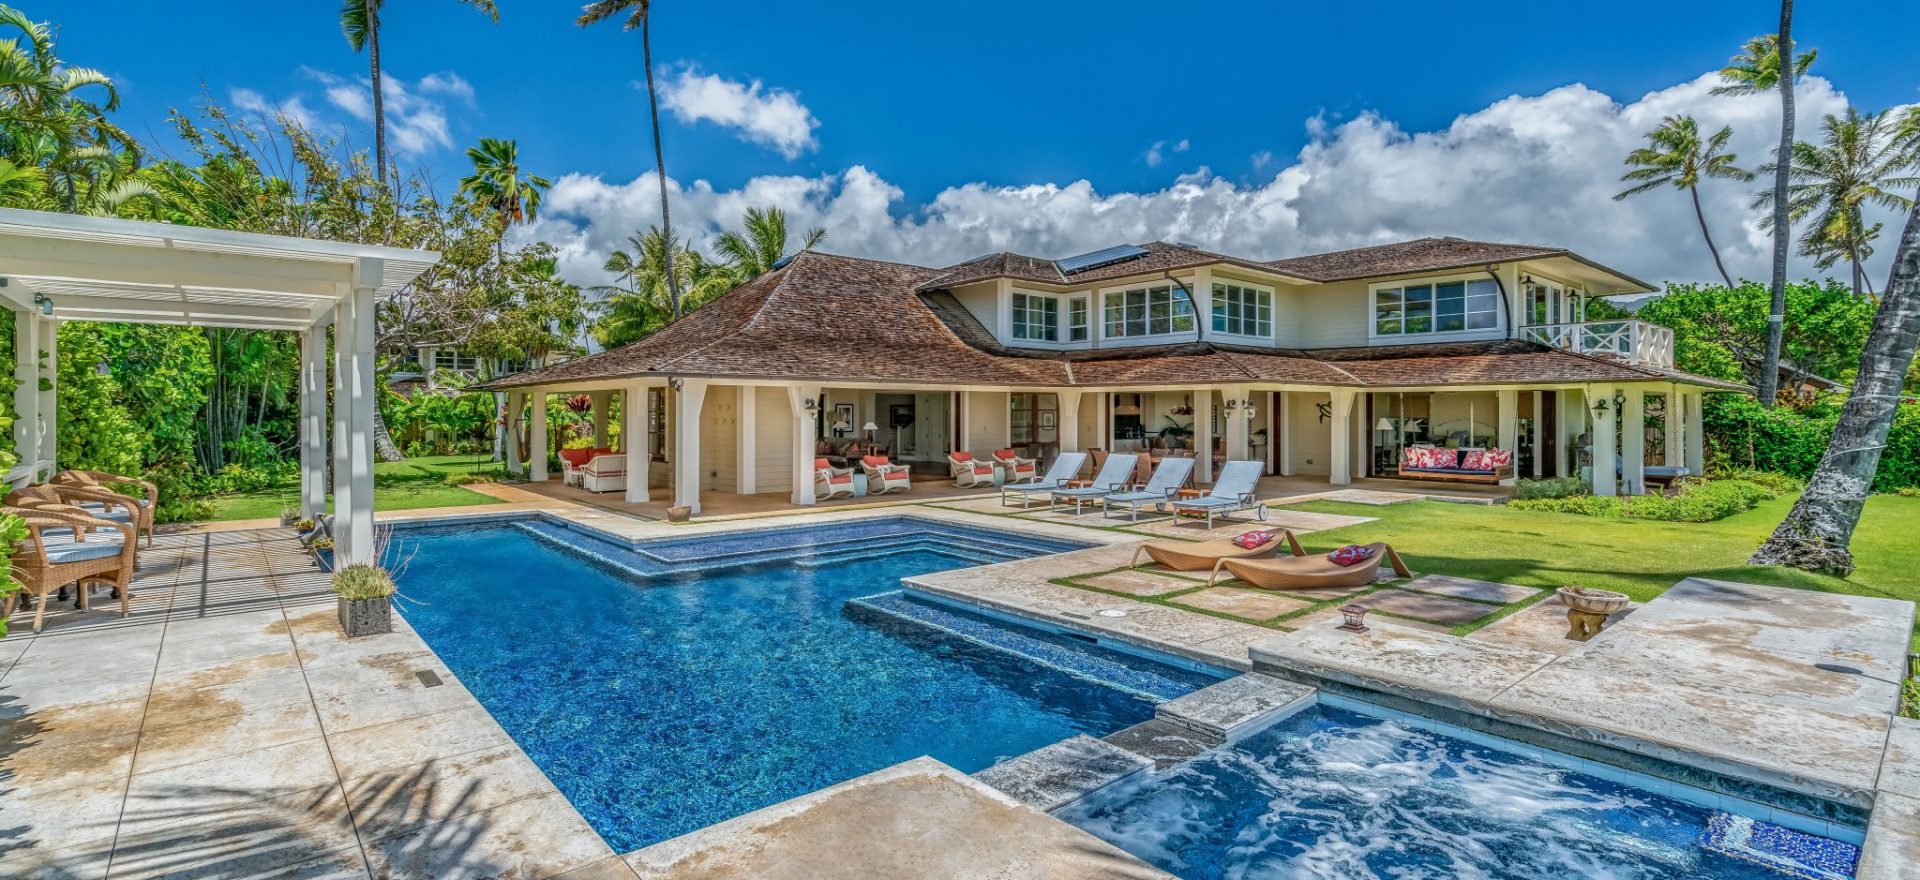 Coral Reef - Back of home with pool - Oahu Vacation Home